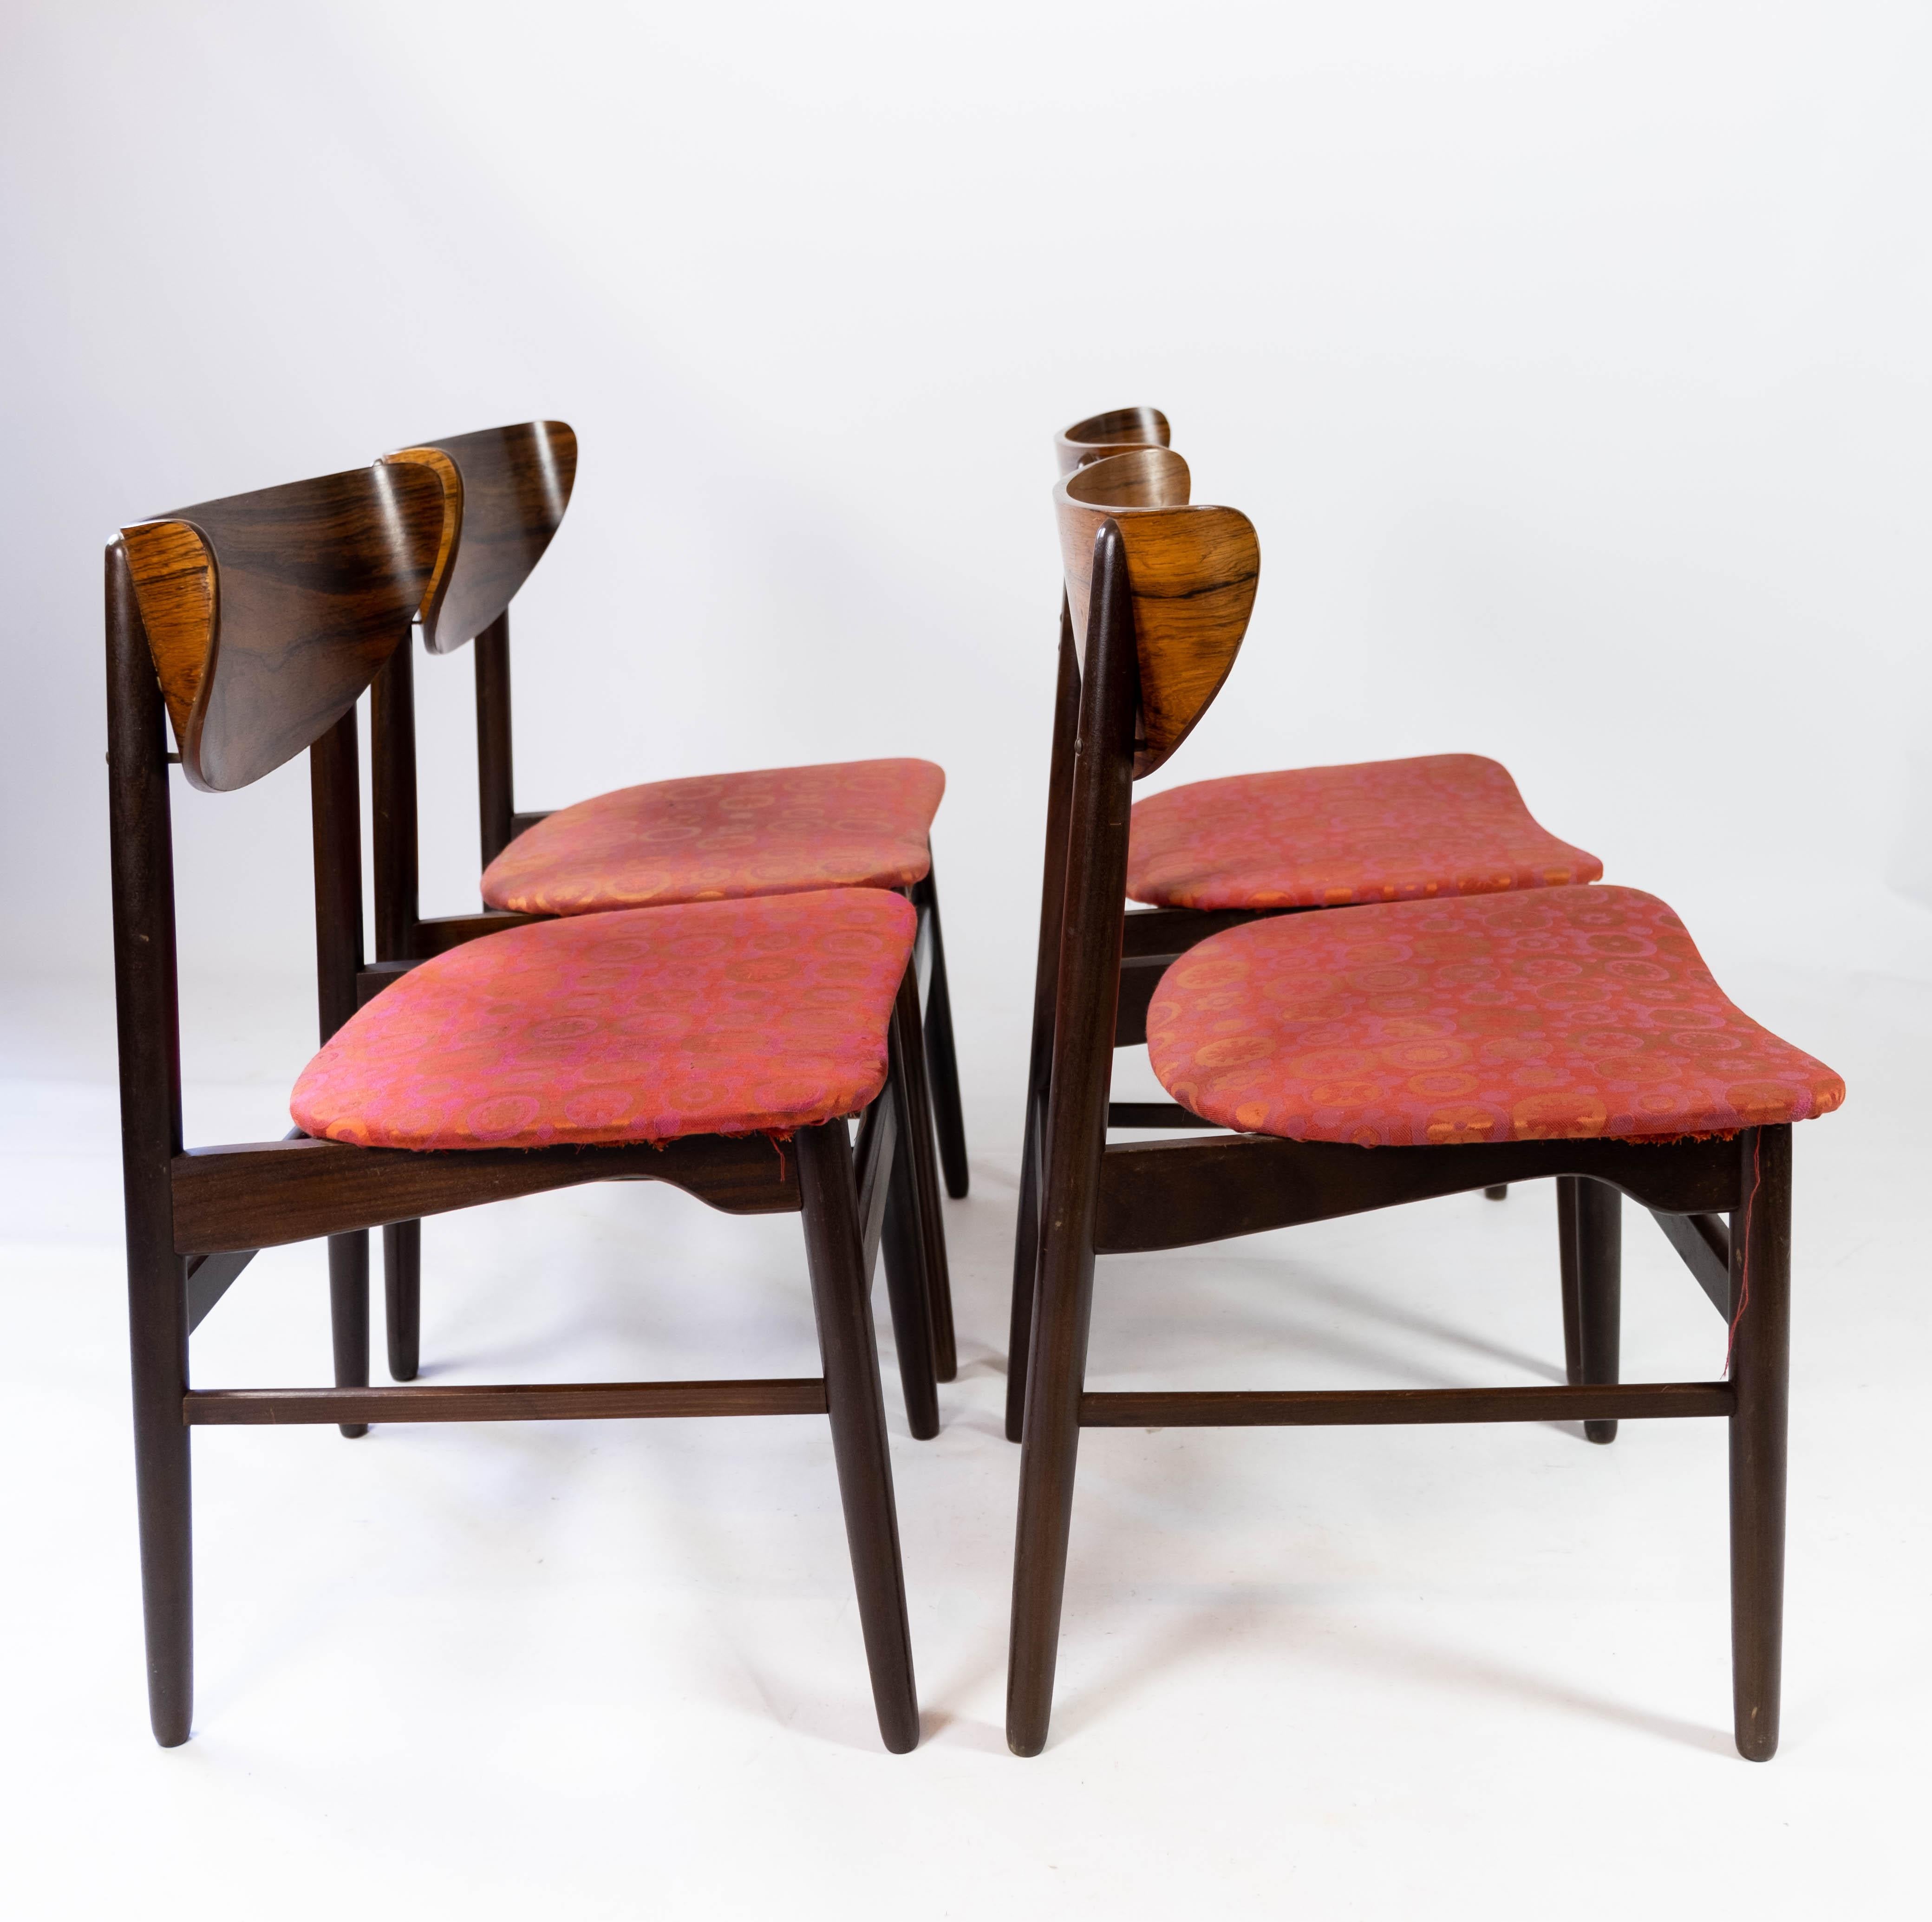 Mid-20th Century Set of Four Dining Room Chairs in Rosewood, of Danish Design, 1960s For Sale